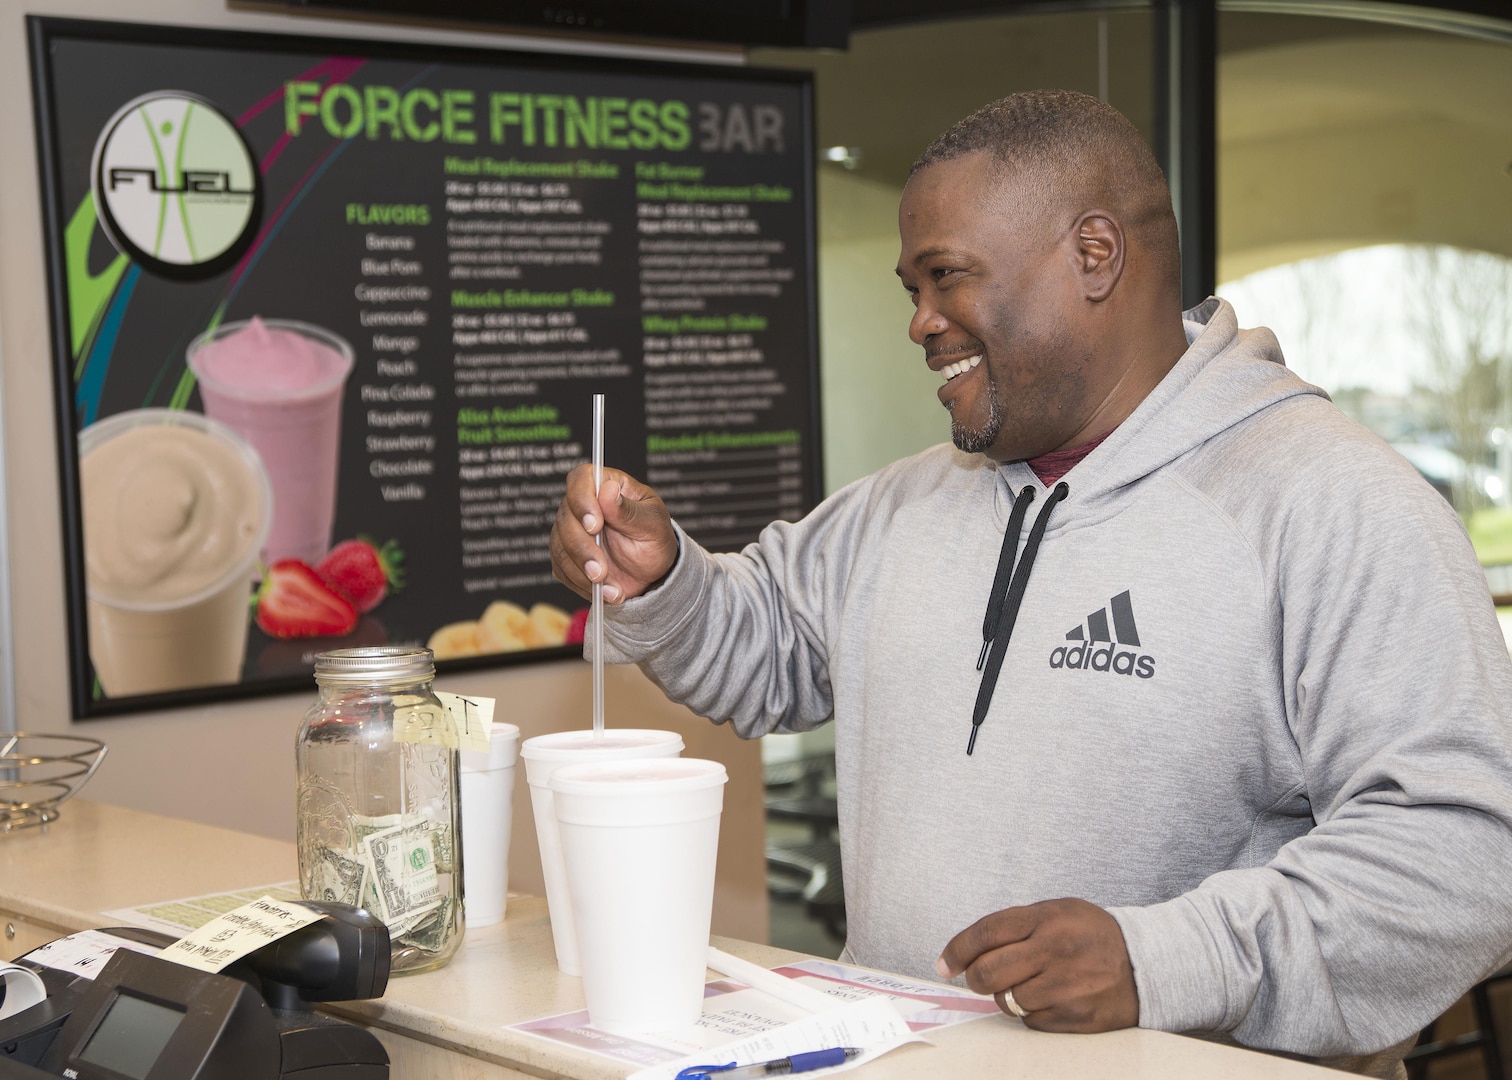 Reginald Creech, Force Fitness Bar customer, receives a protein smoothie following a workout at the Rambler Fitness Center on Joint Base San Antonio-Randolph Jan. 20, 2017. The Recommended Dietary Allowance (RDA), the amount of a nutrient an individual needs to meet basic nutritional requirements, suggests that protein is more effective if consumption is spaced out over the day’s meals and snacks, rather than loading up during any one meal. (U.S. Air Force photo by Airman 1st Class Lauren Parsons/Released)